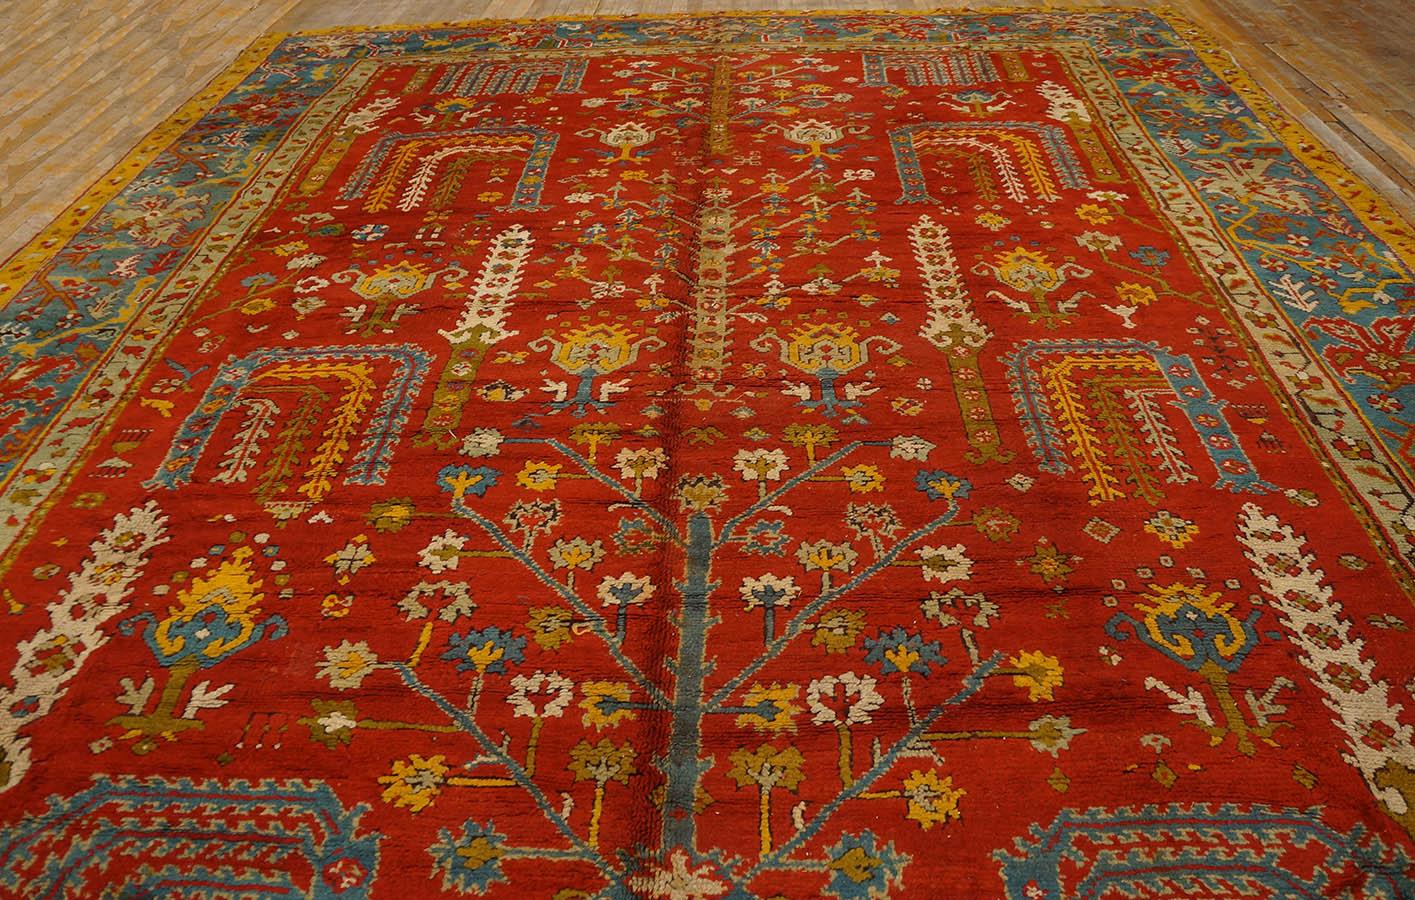 Late 19th Century Turkish Oushak Carpet  ( 11' 5'' x 14' 6'' - 348 x 442 cm ) In Good Condition For Sale In New York, NY